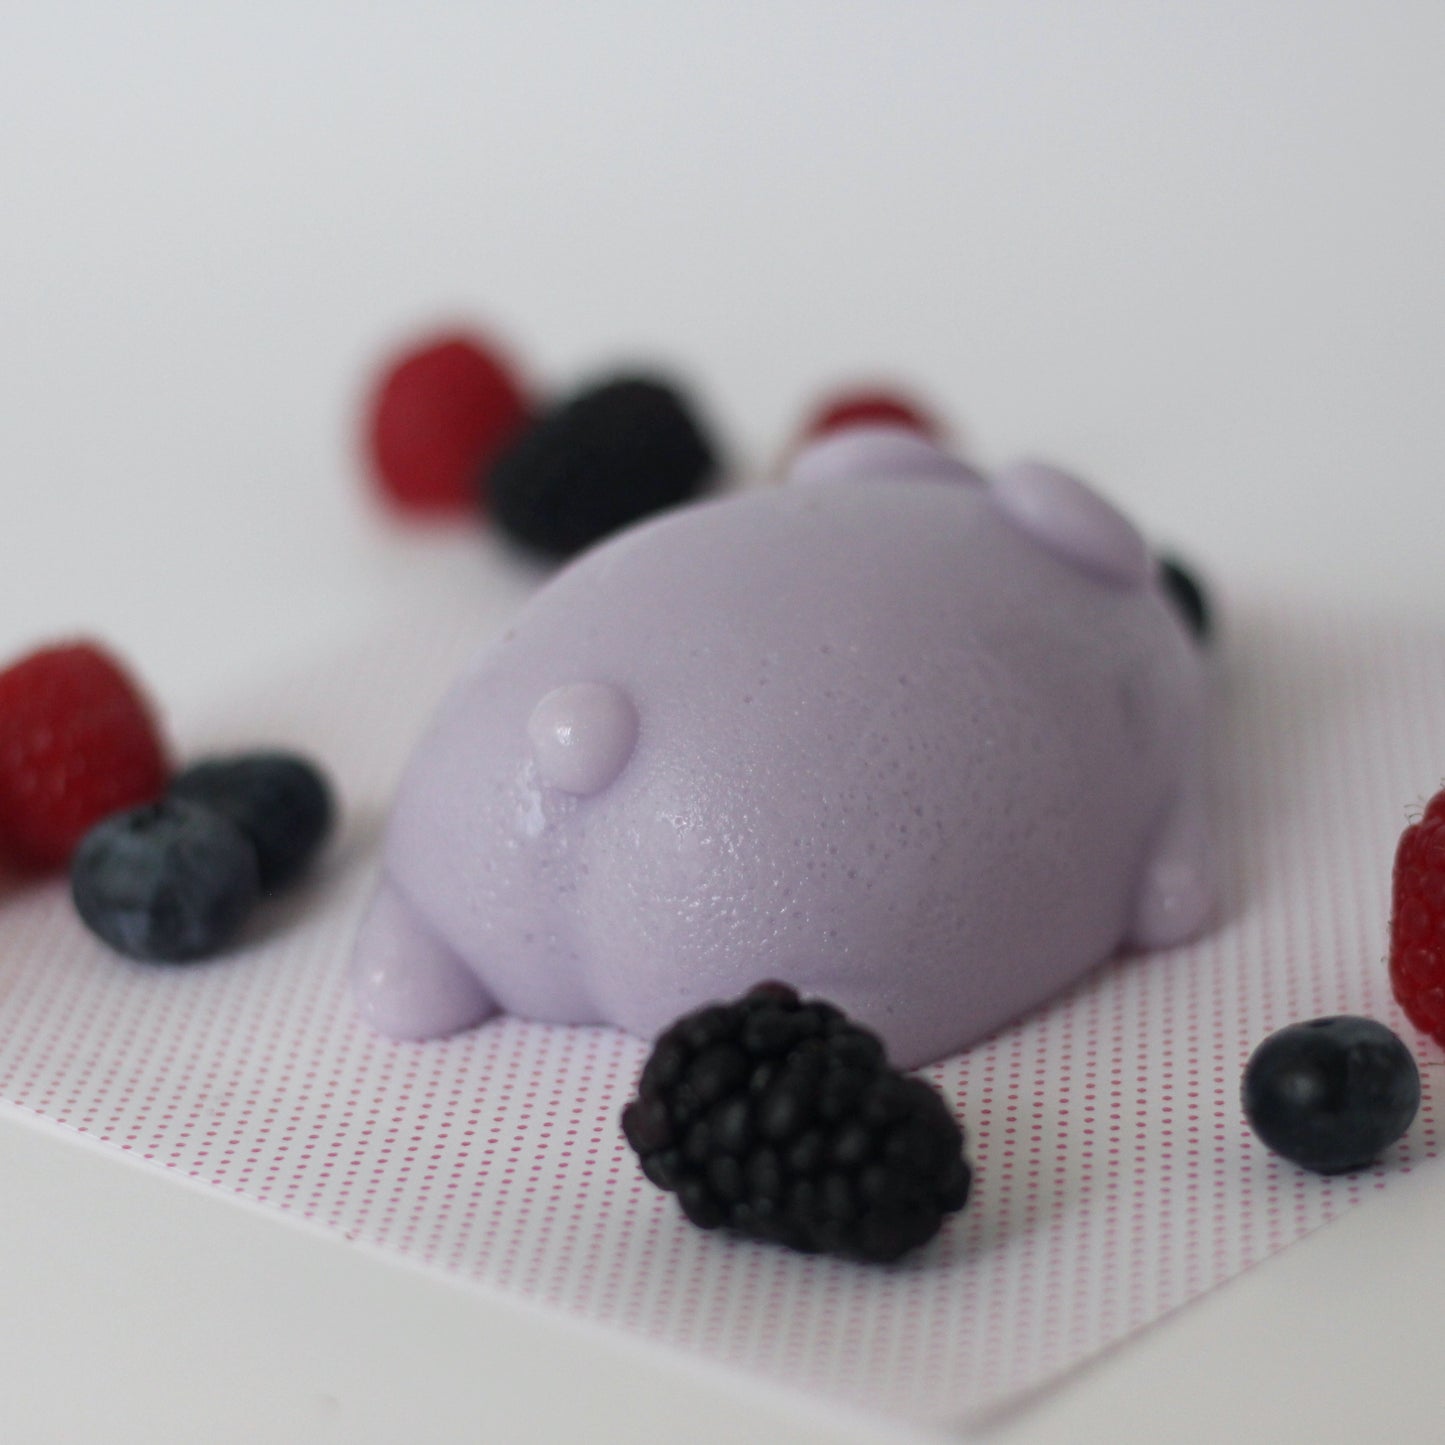 Berry Bunny Jelly Soap - Frolic Creations - Soap - Cute Self Care - Kawaii Atheistic - Quirky Gift - Gift For Her